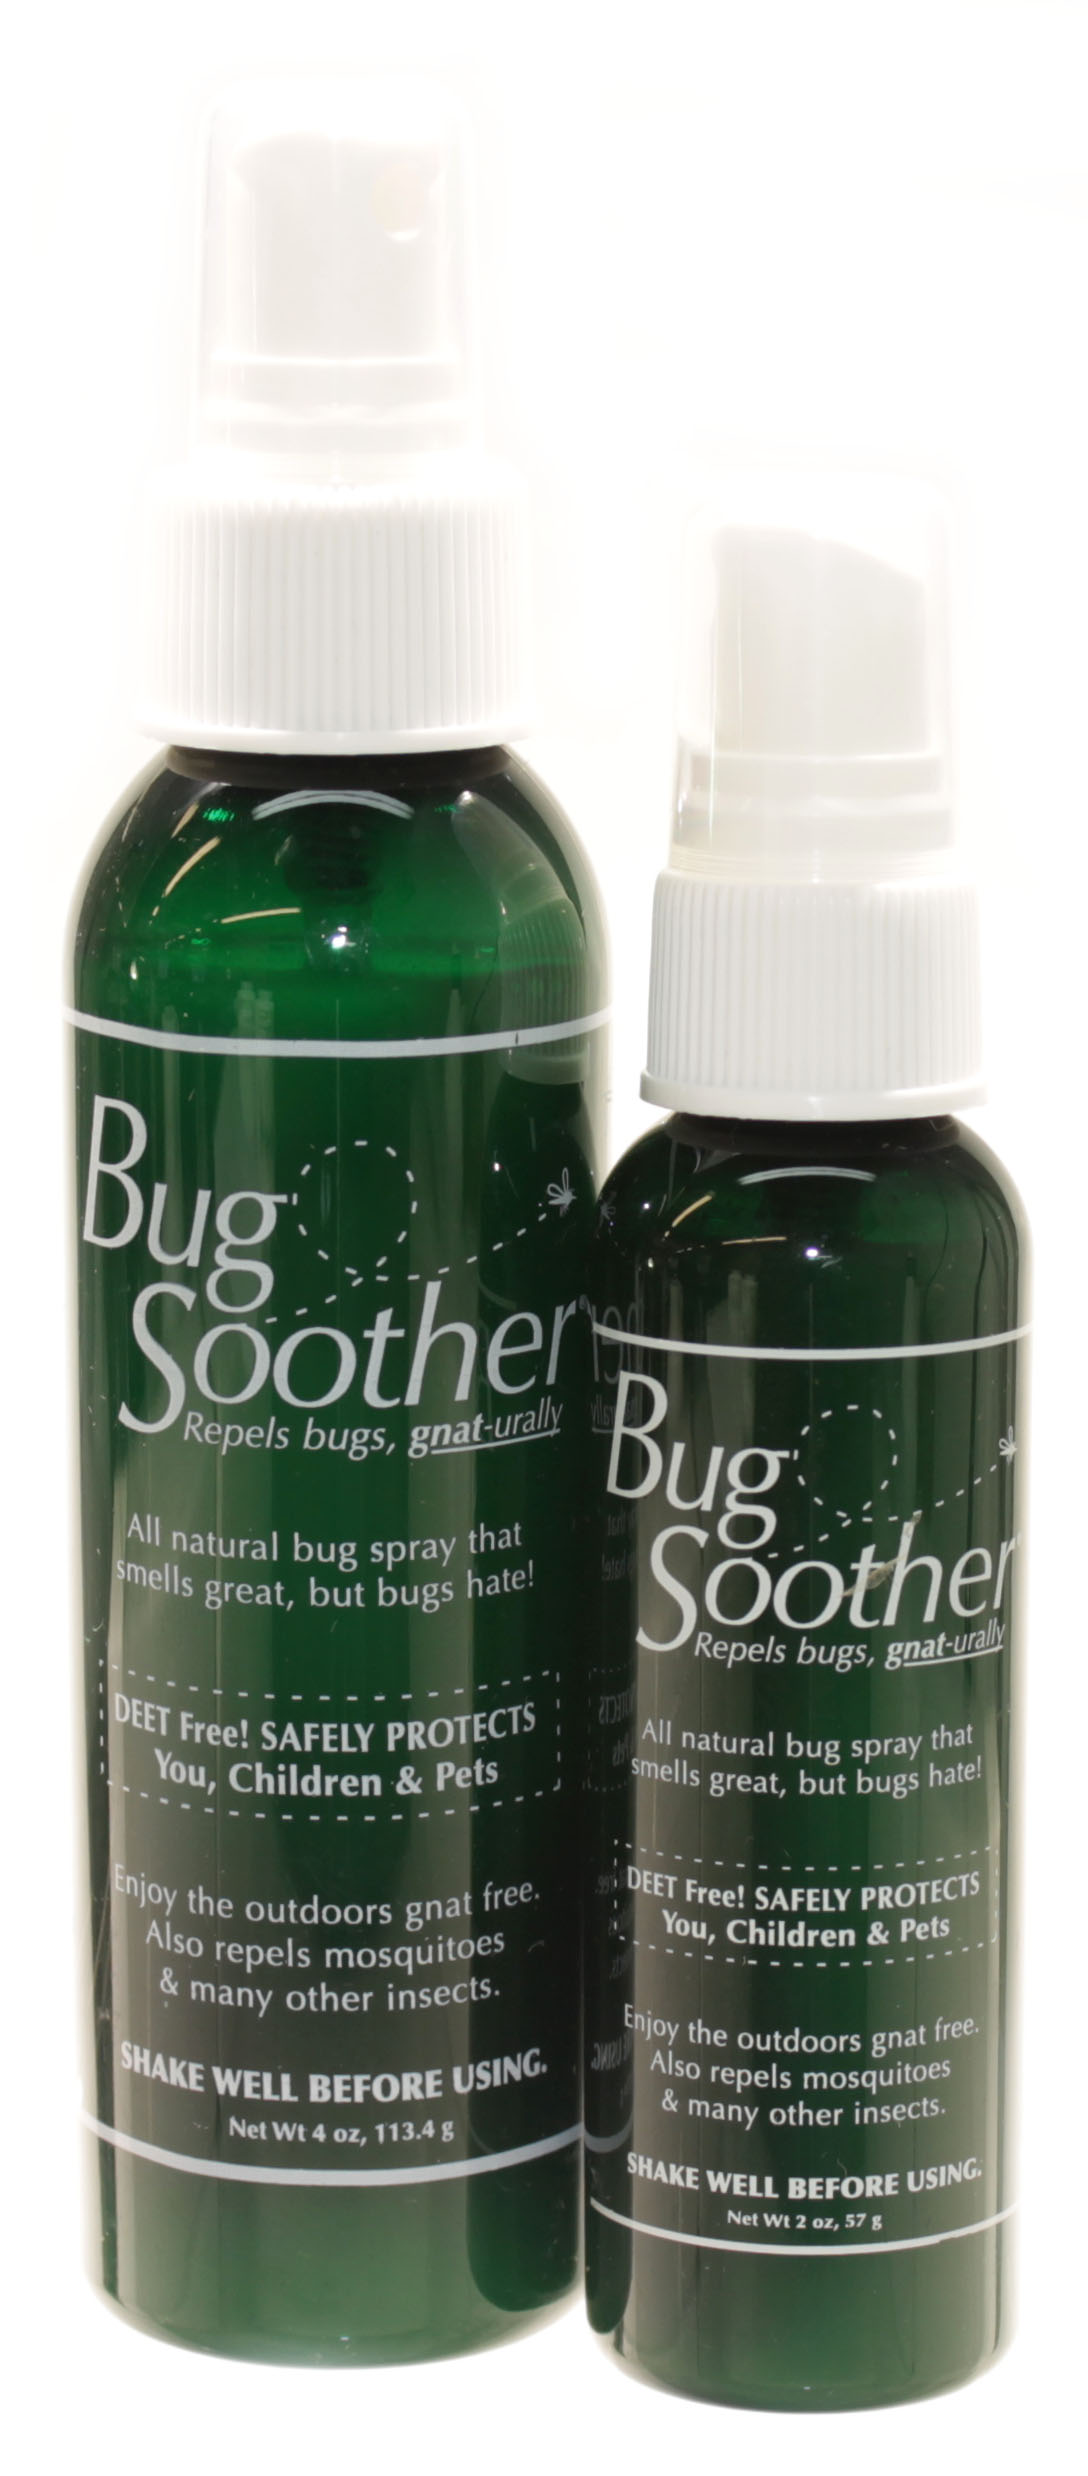 Bug-Soother-Group.jpg